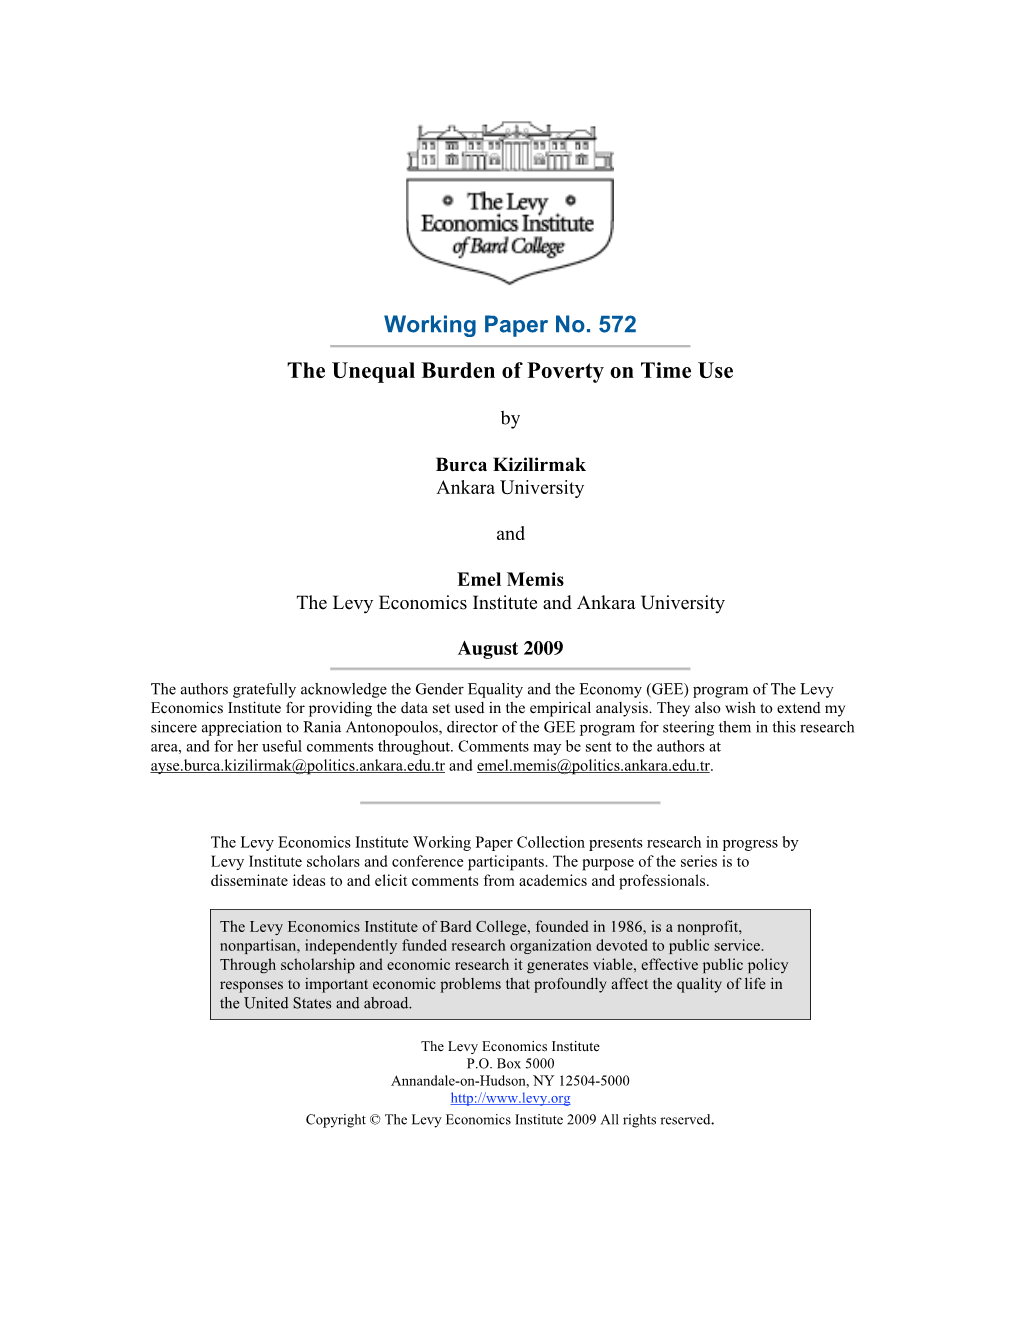 Working Paper No. 572 the Unequal Burden of Poverty on Time Use